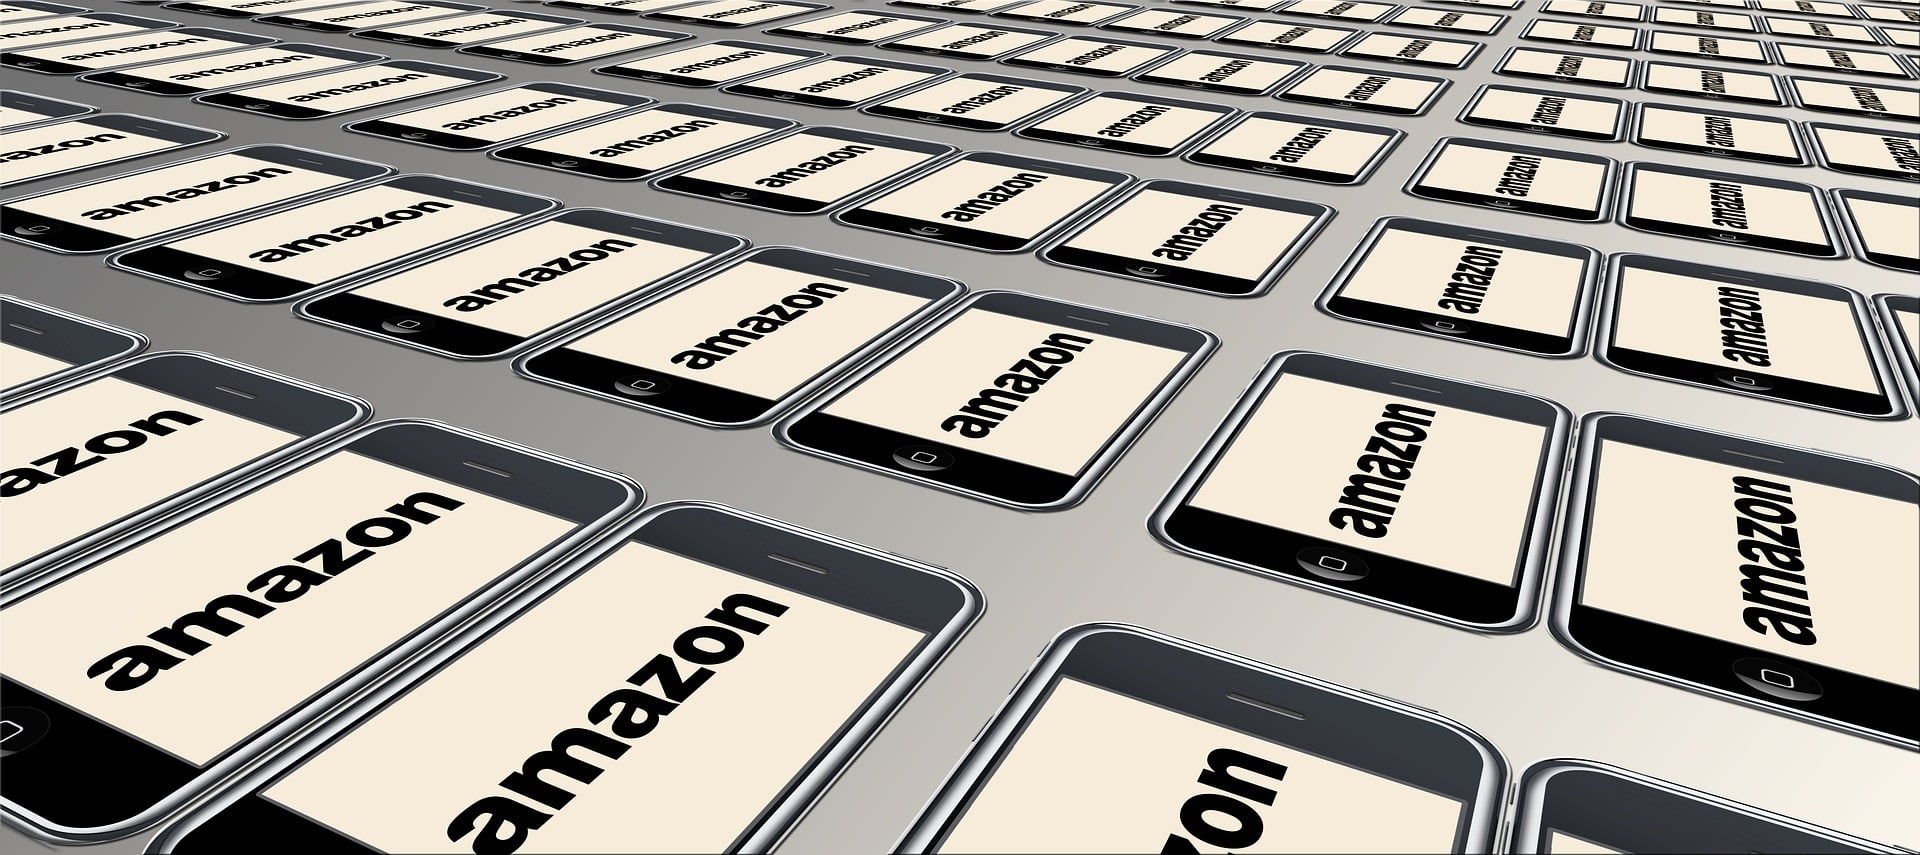 Amazon Apple Days Sale is here, but is COVID19 impacting product availability